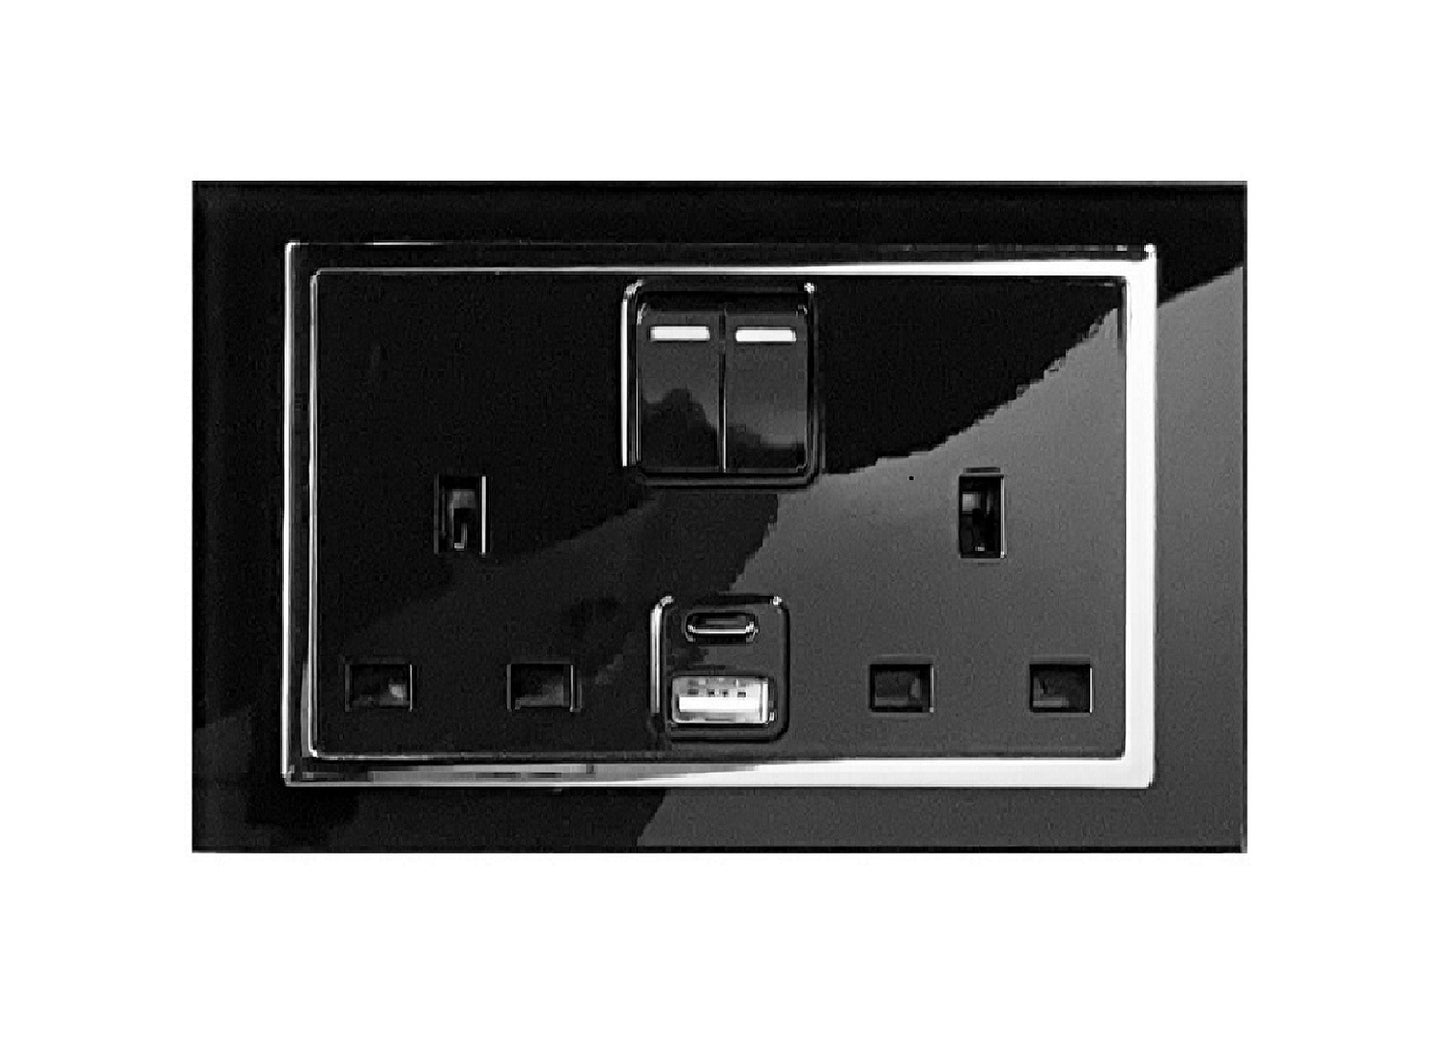 CRYSTAL 3.1A USBC & 13A DP DOUBLE PLUG SOCKET WITH SWITCH BLACK CT